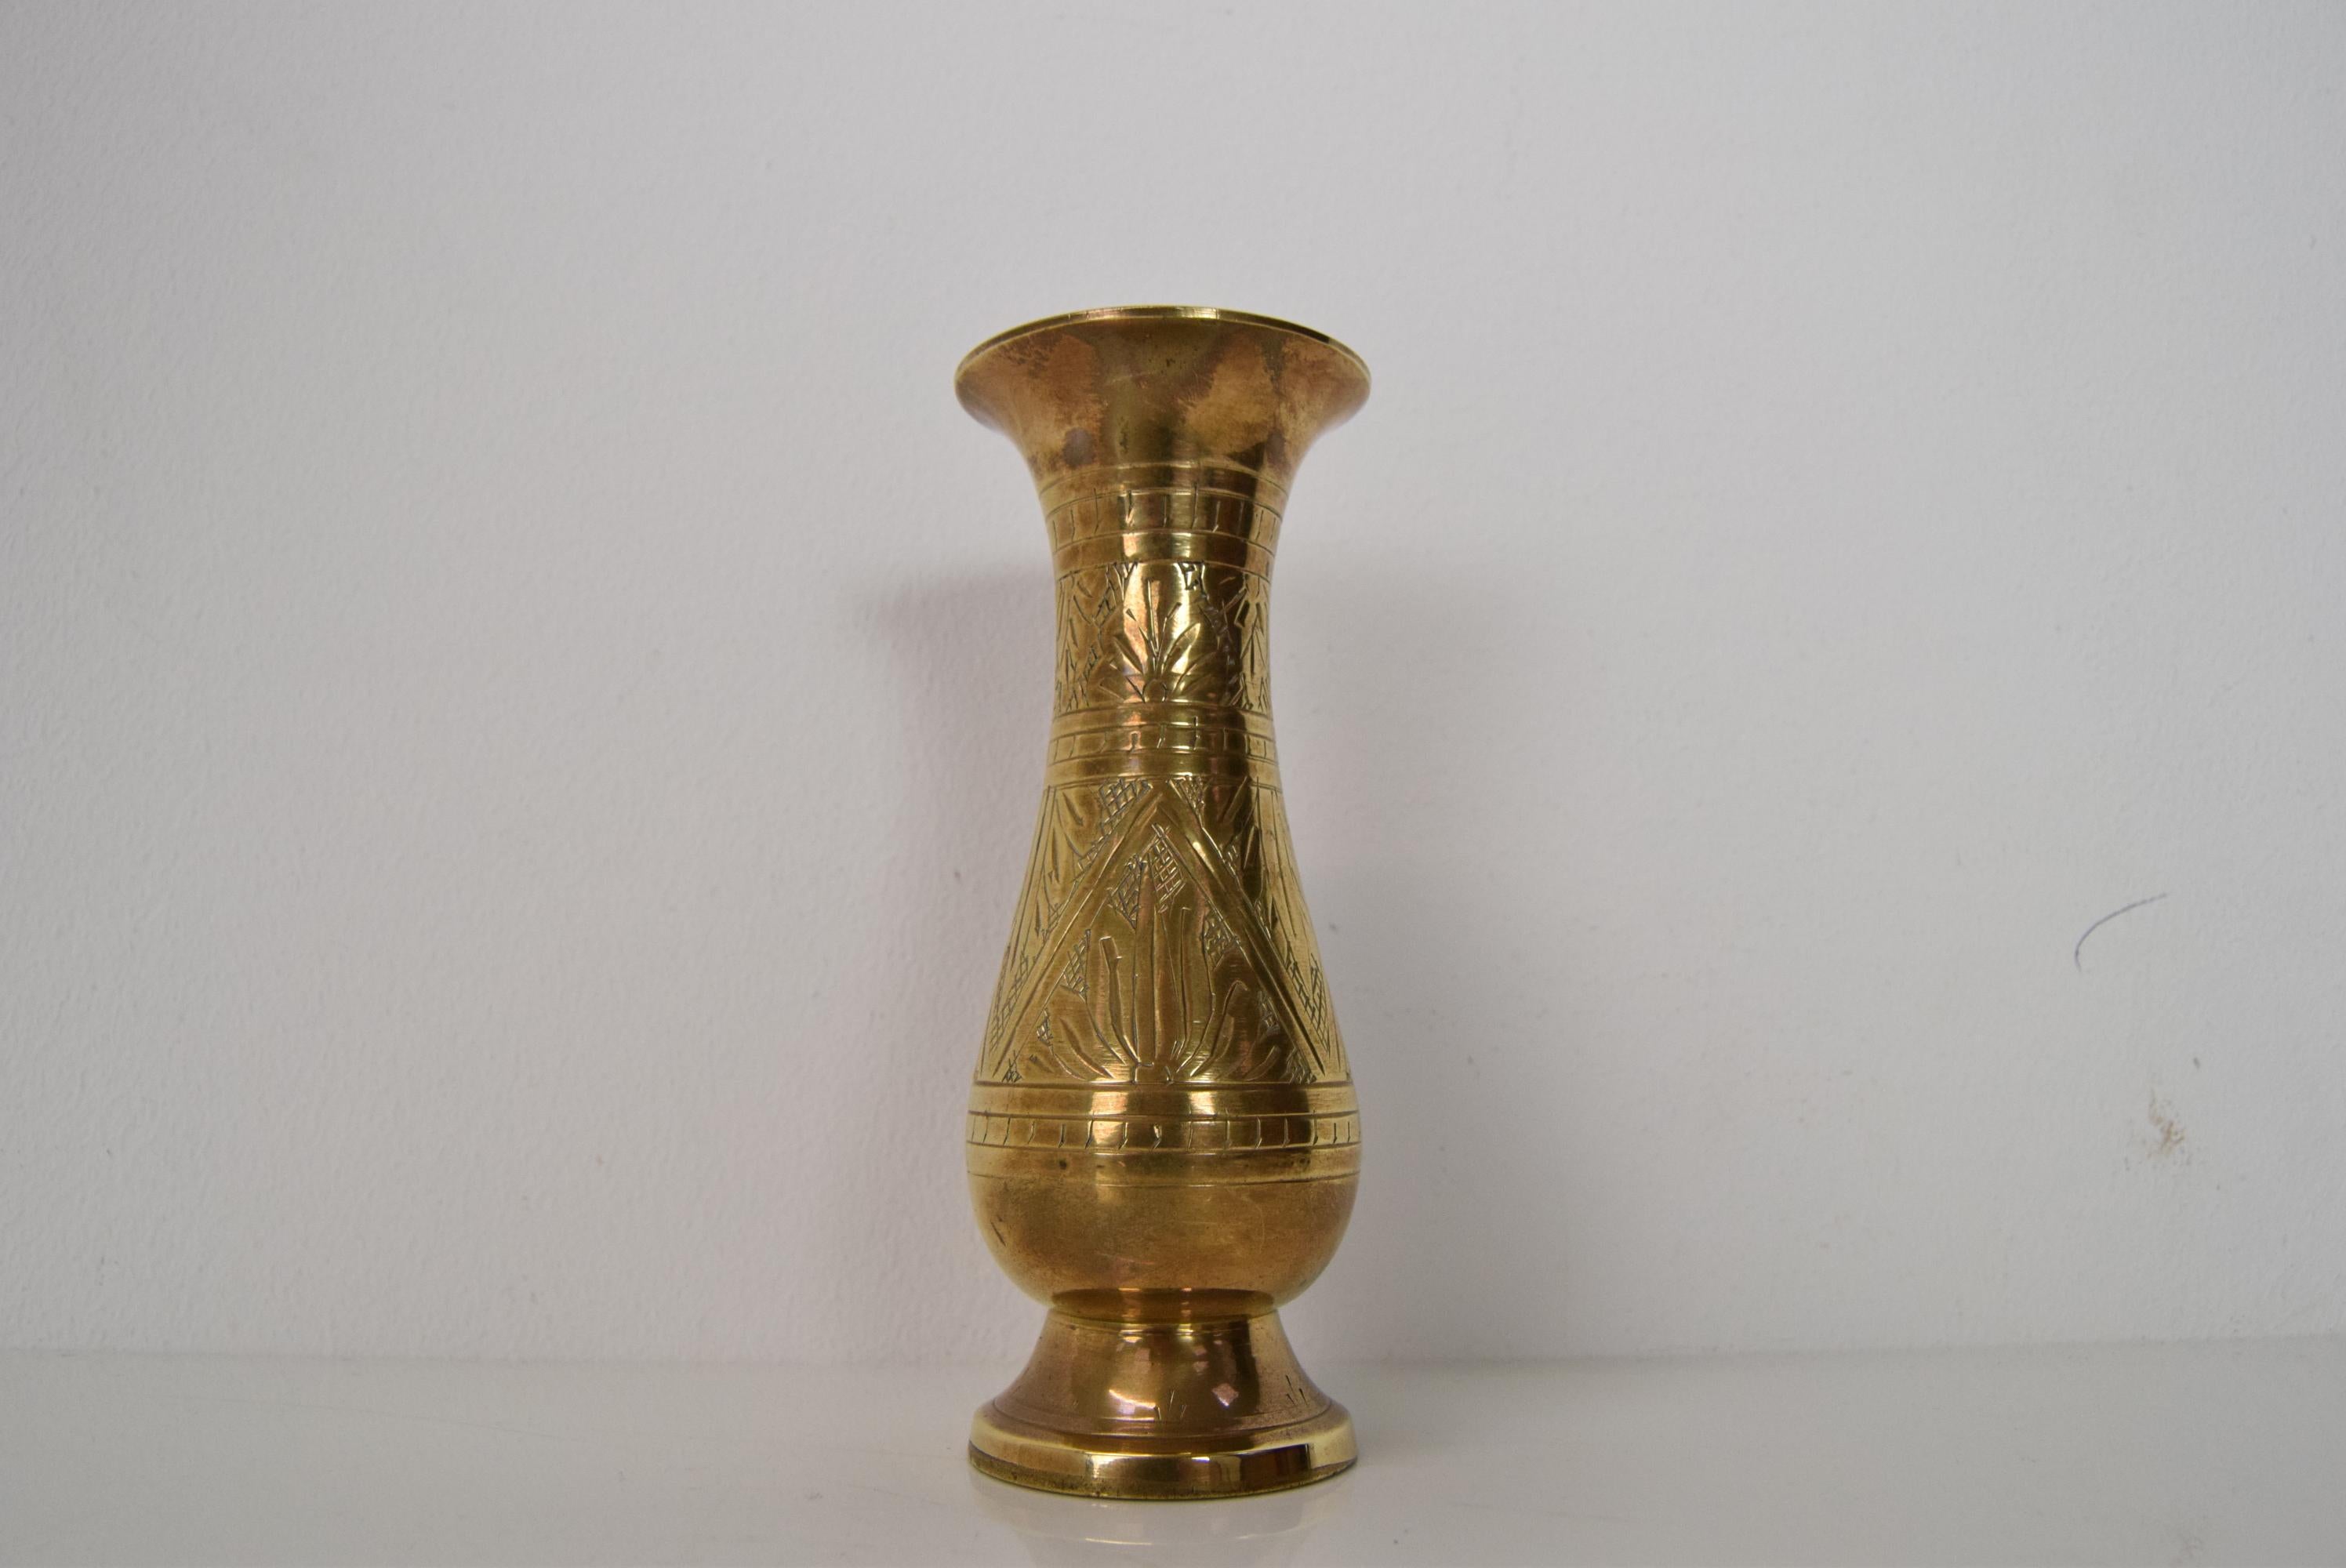 Made of Brass
Made in India
With aged patina
Re-polished
Good original condition.